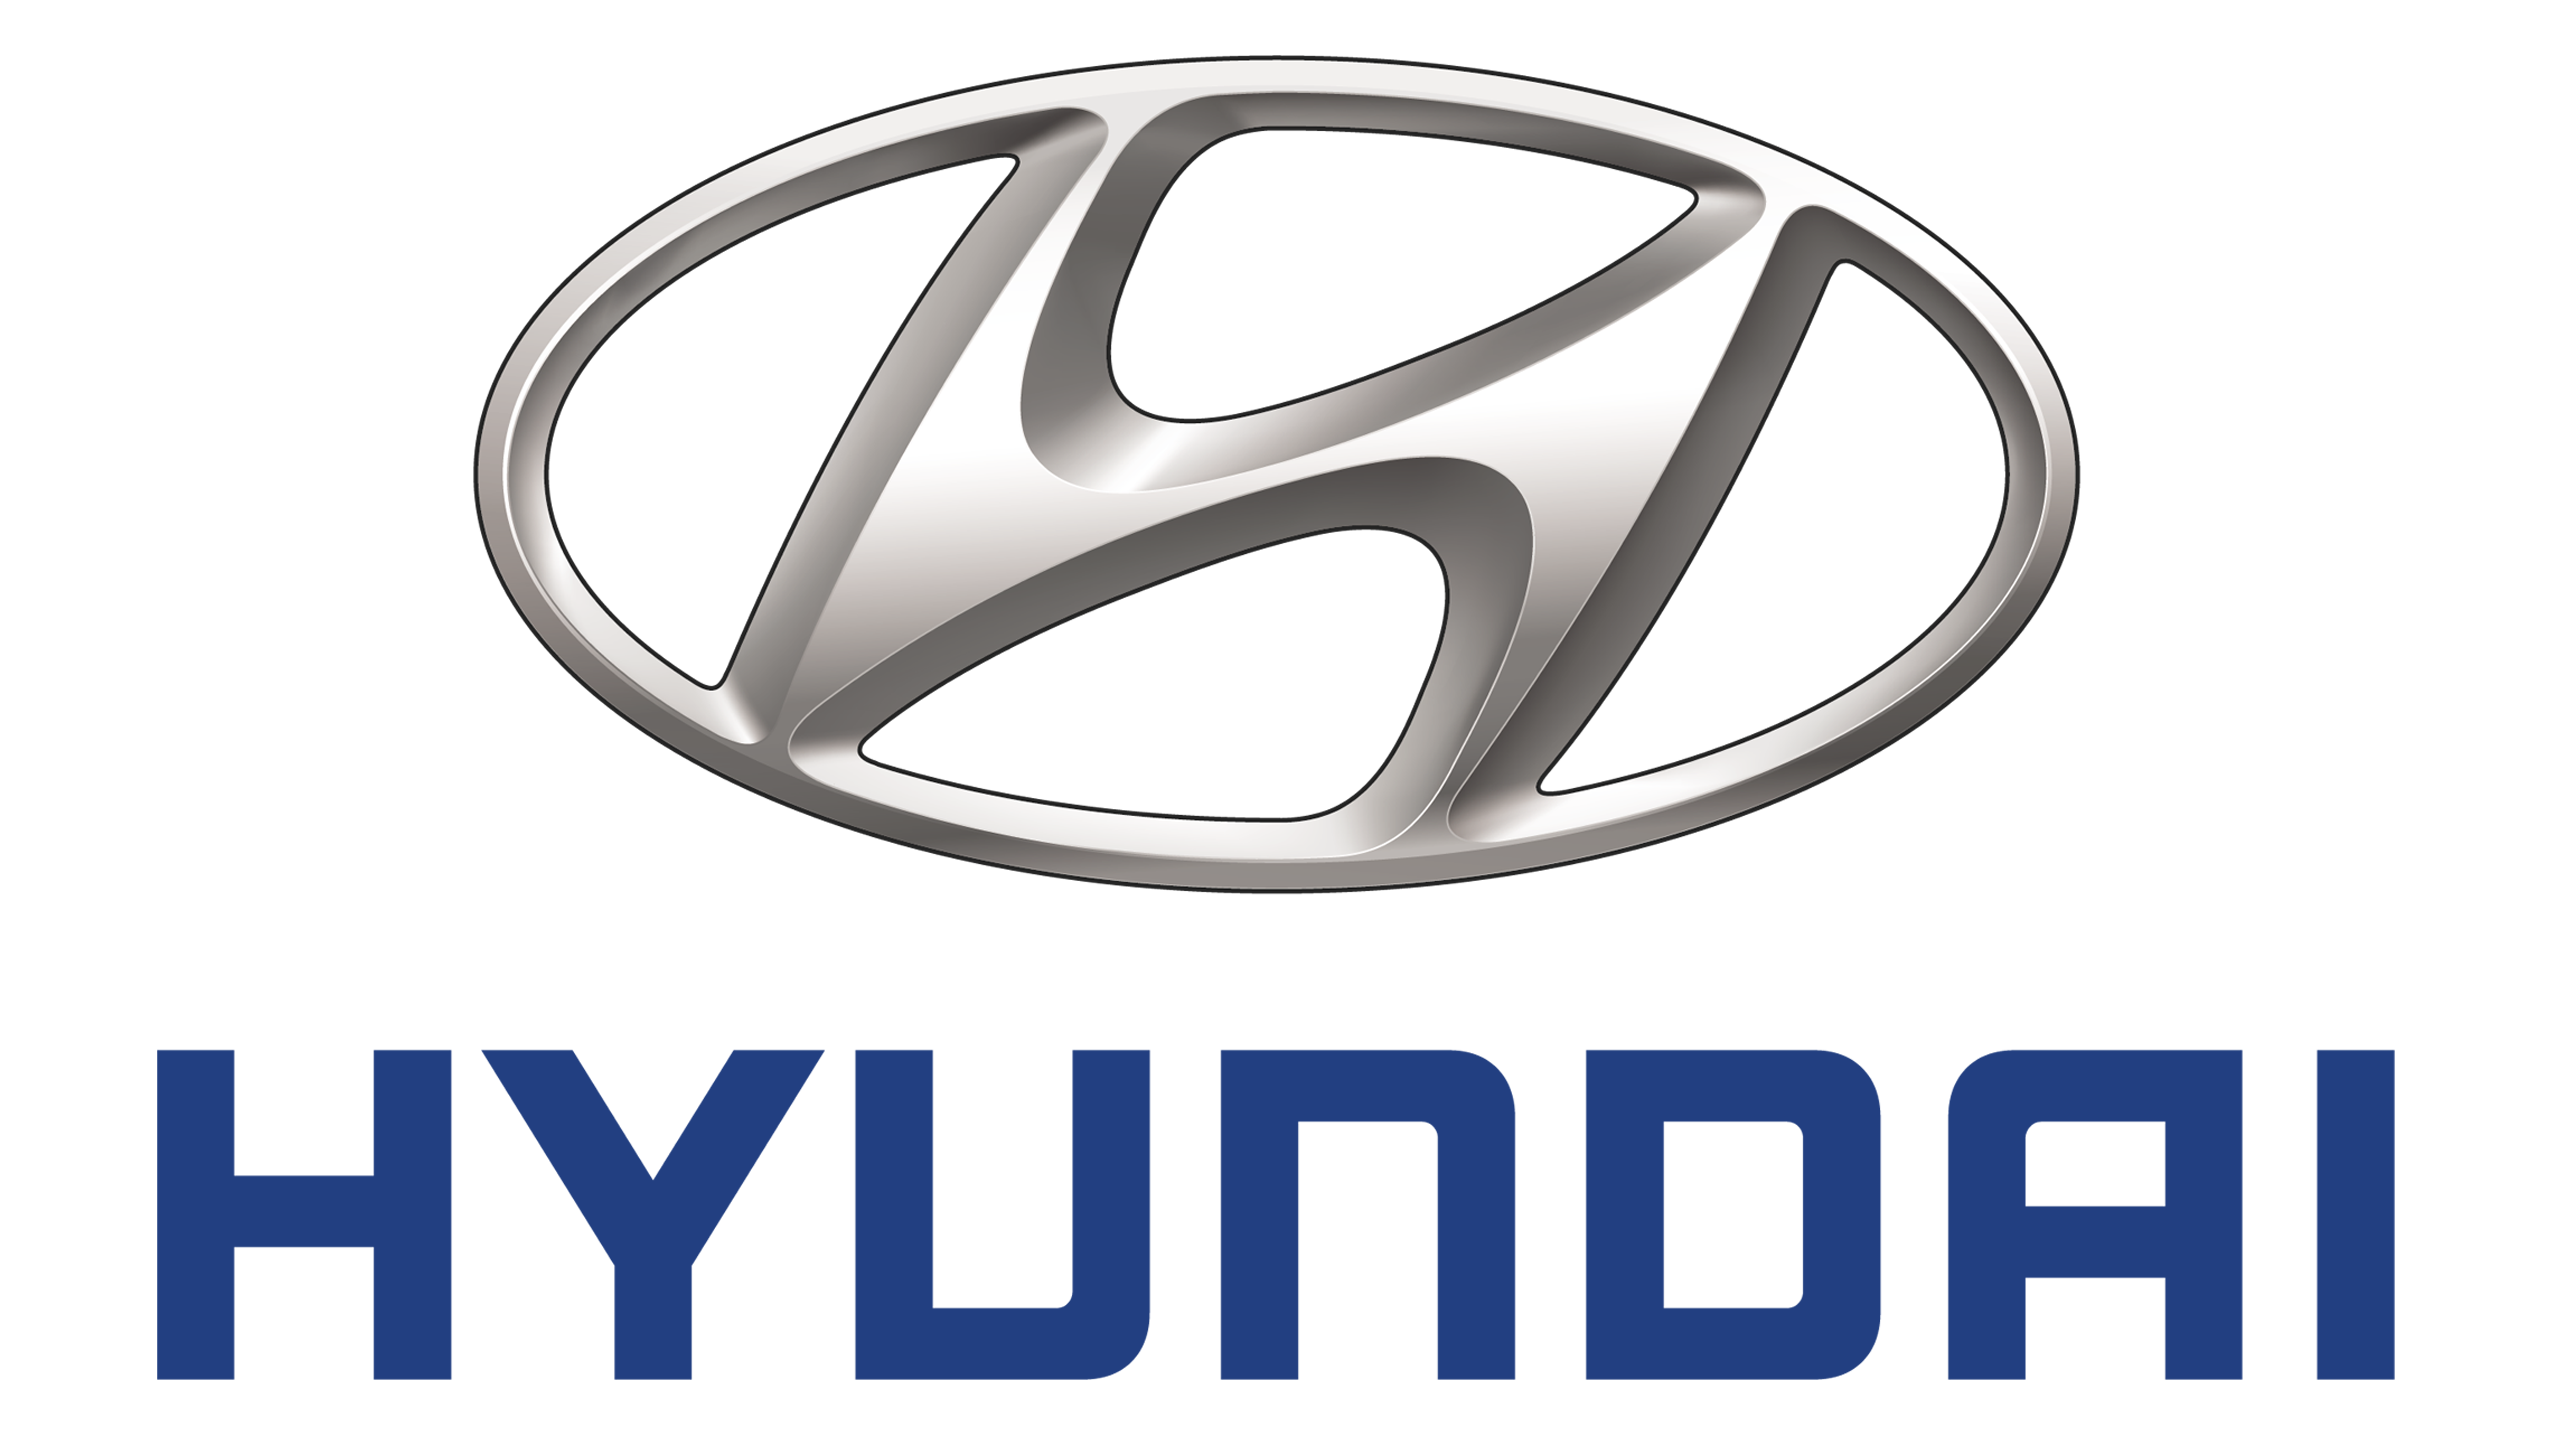  Hyundai to unveil compact SUV 'Venue' with new blue link tech